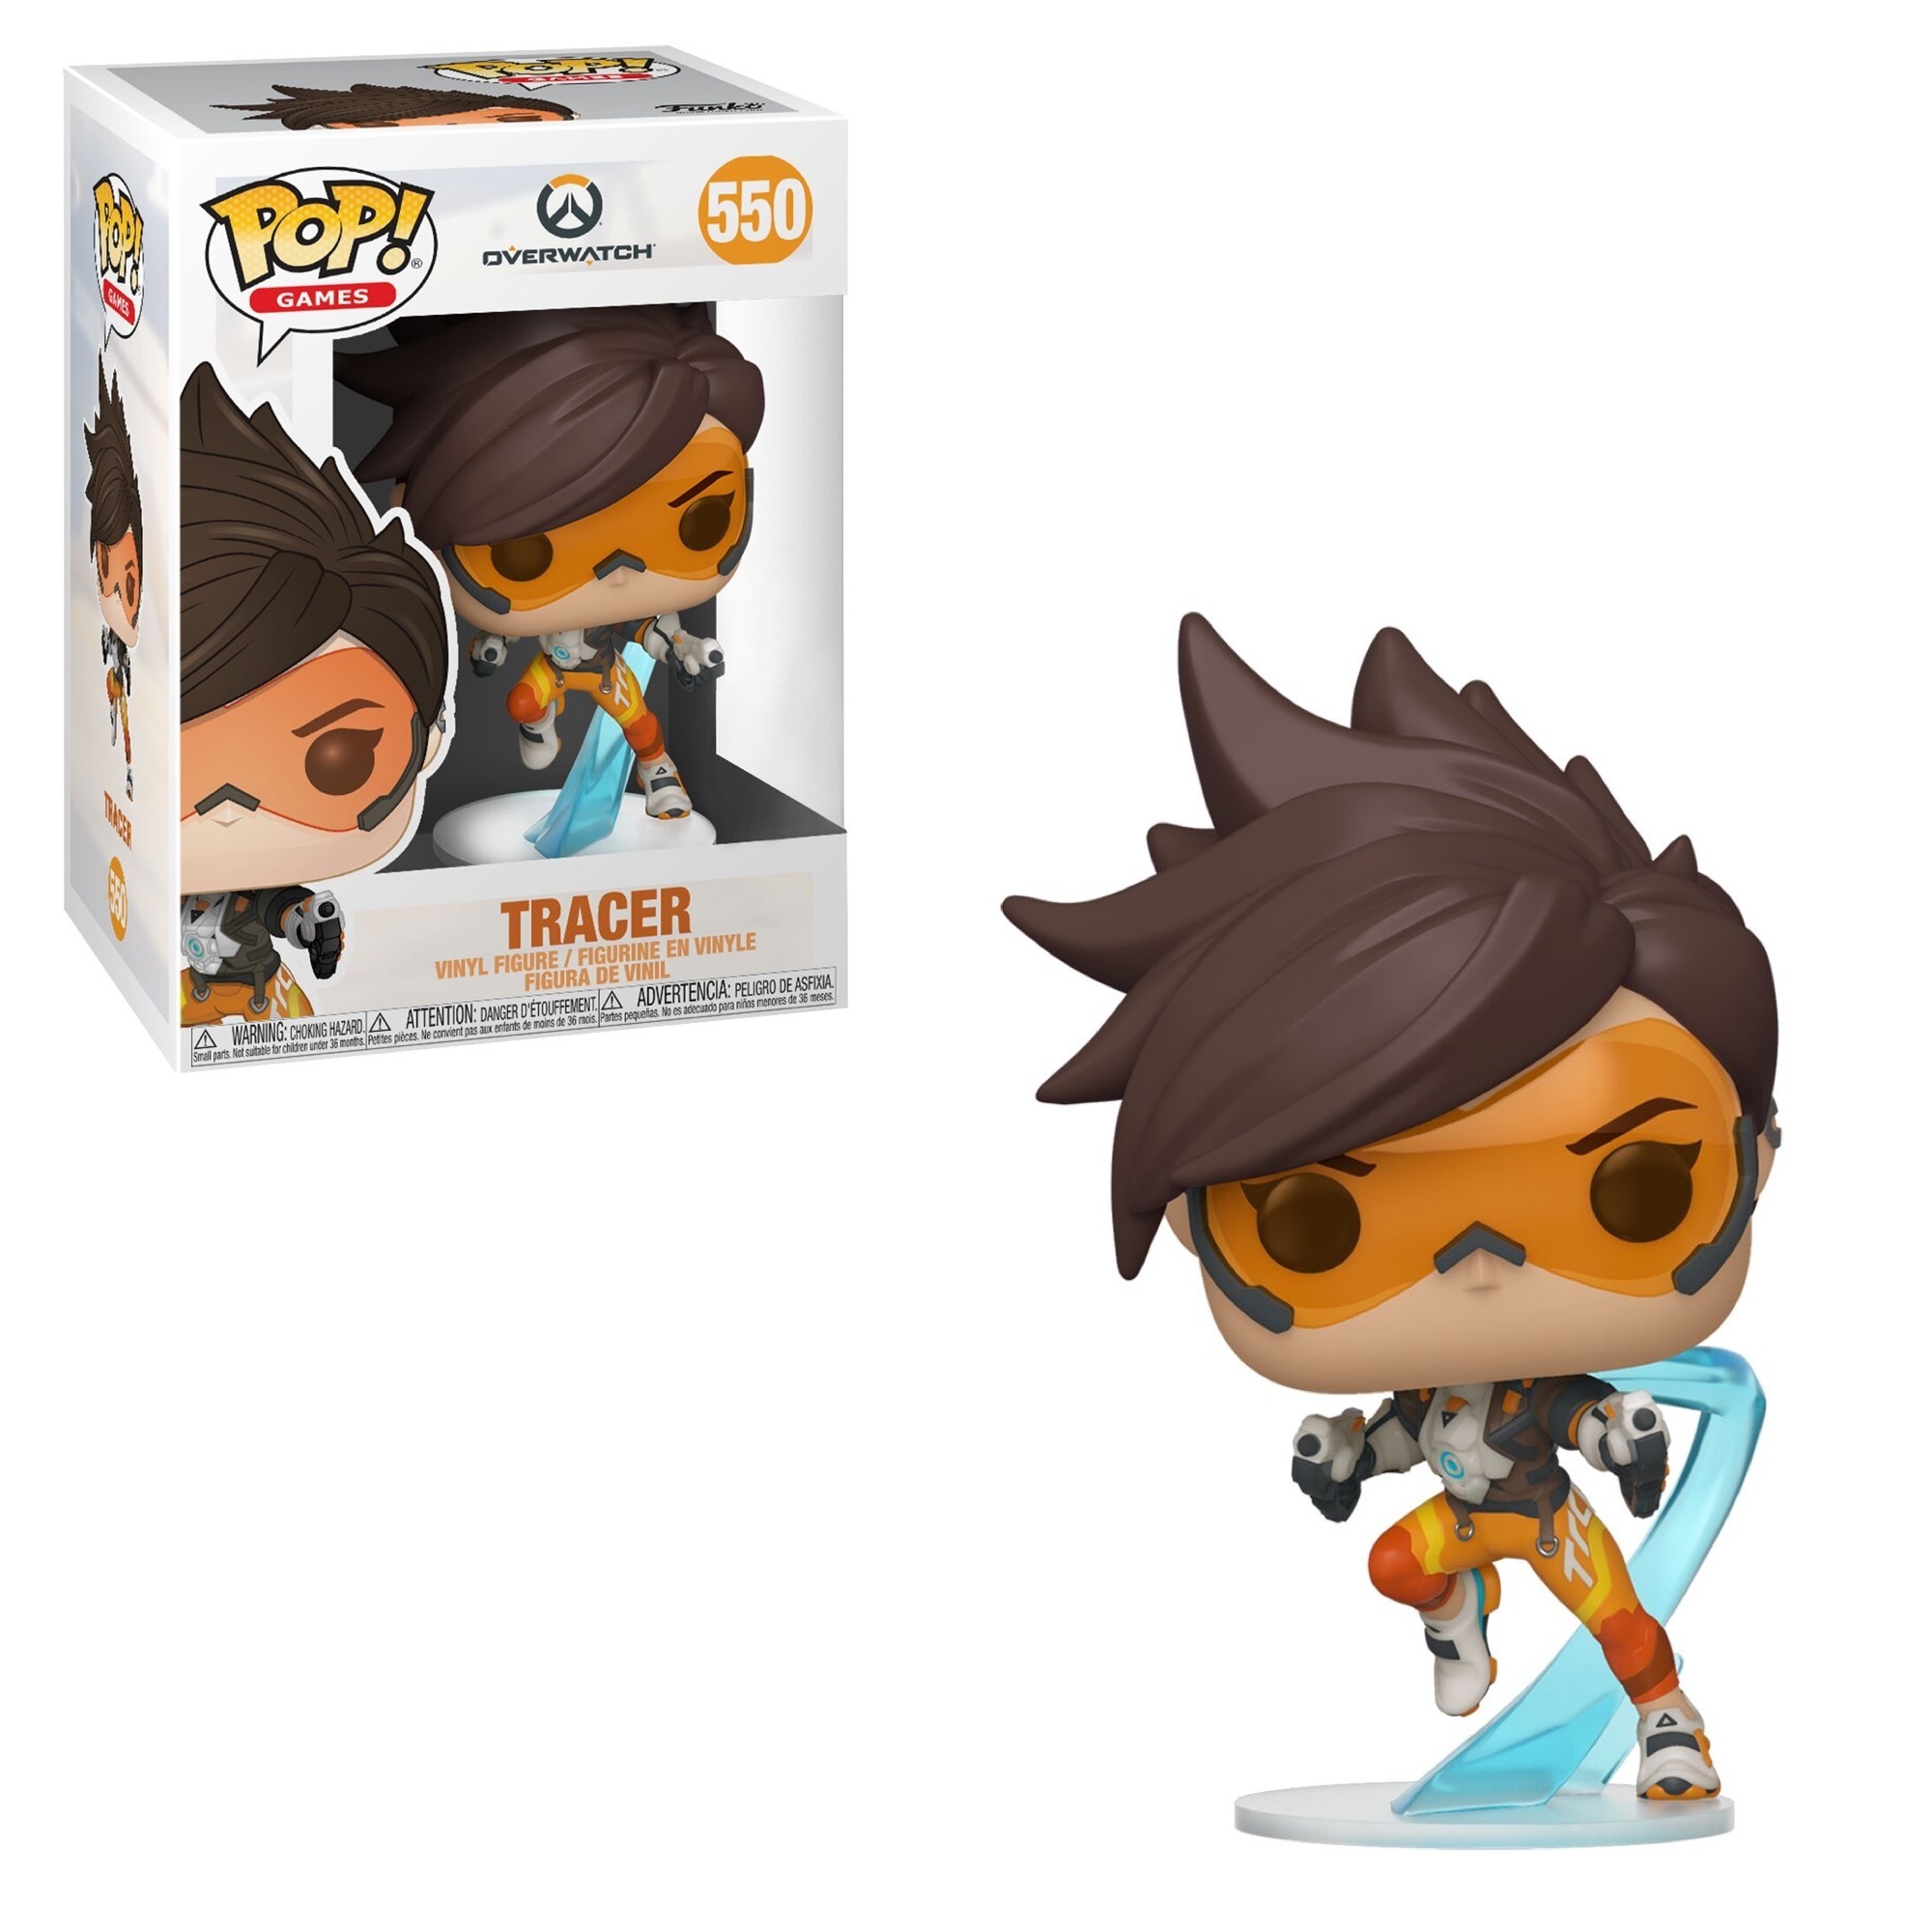 New with Damaged Box Games Vinyl Figure Tracer 550 Overwatch POP 